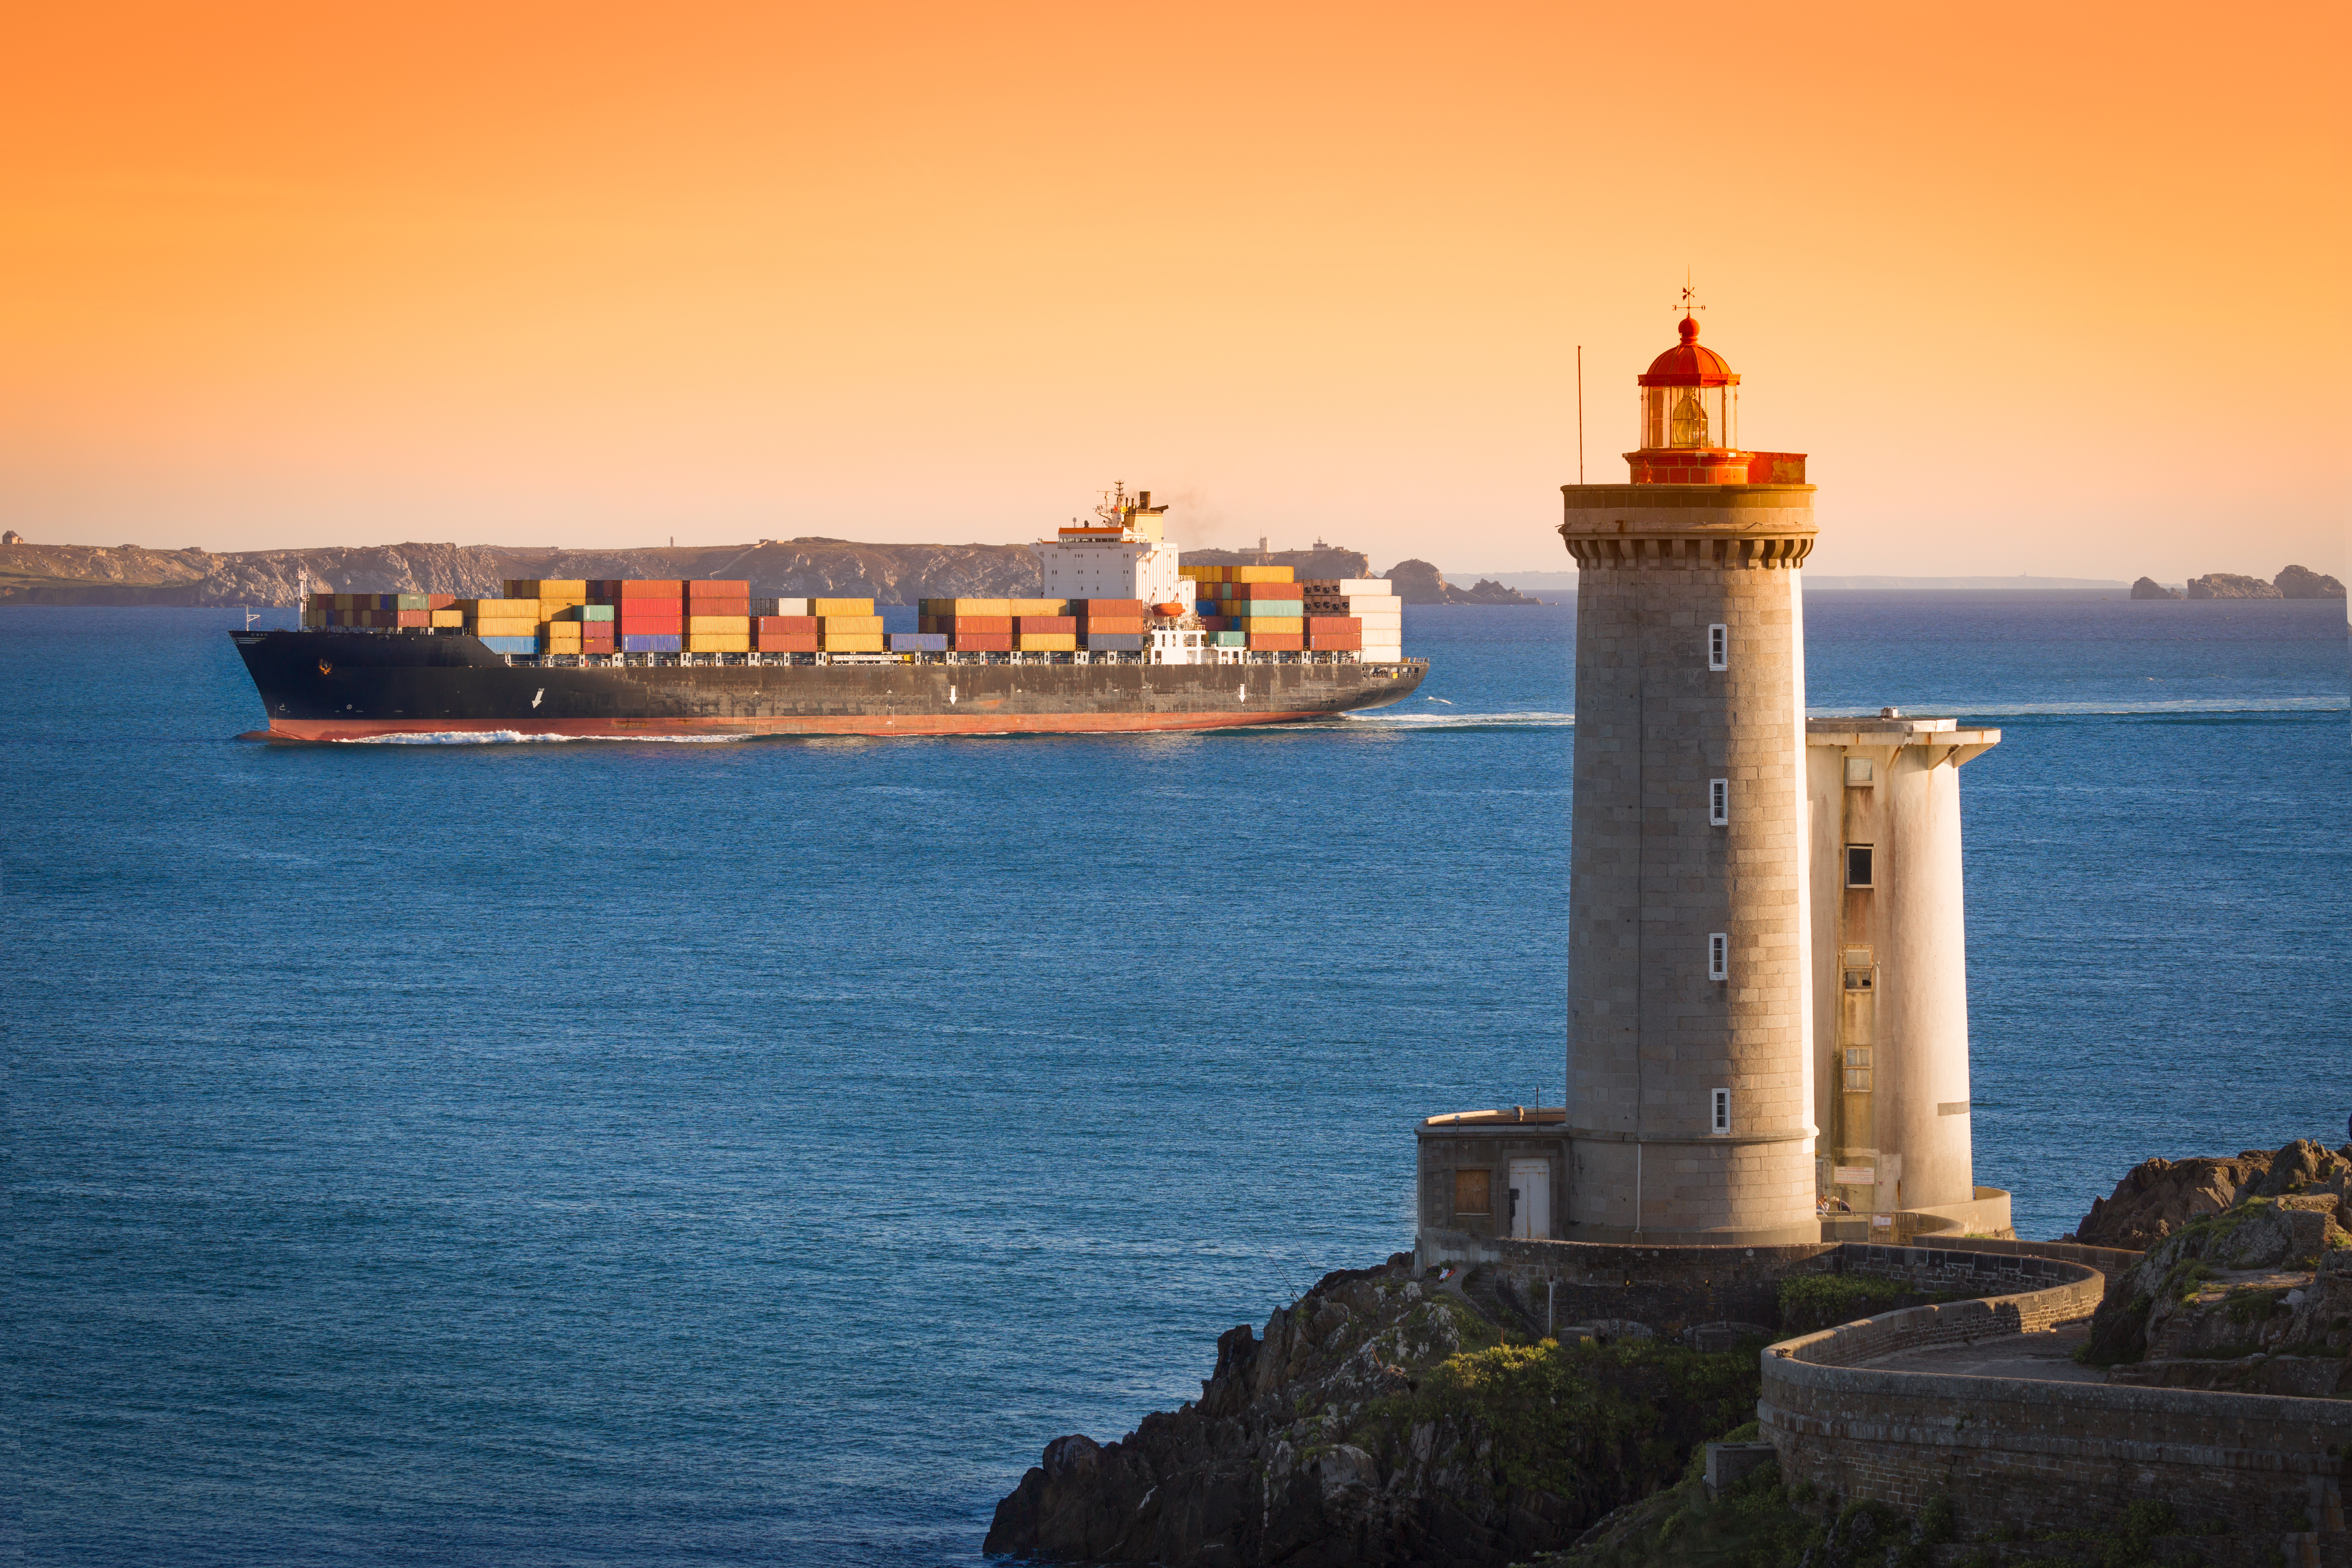 Image of a cargo ship with a lighthouse at sunset in the background.